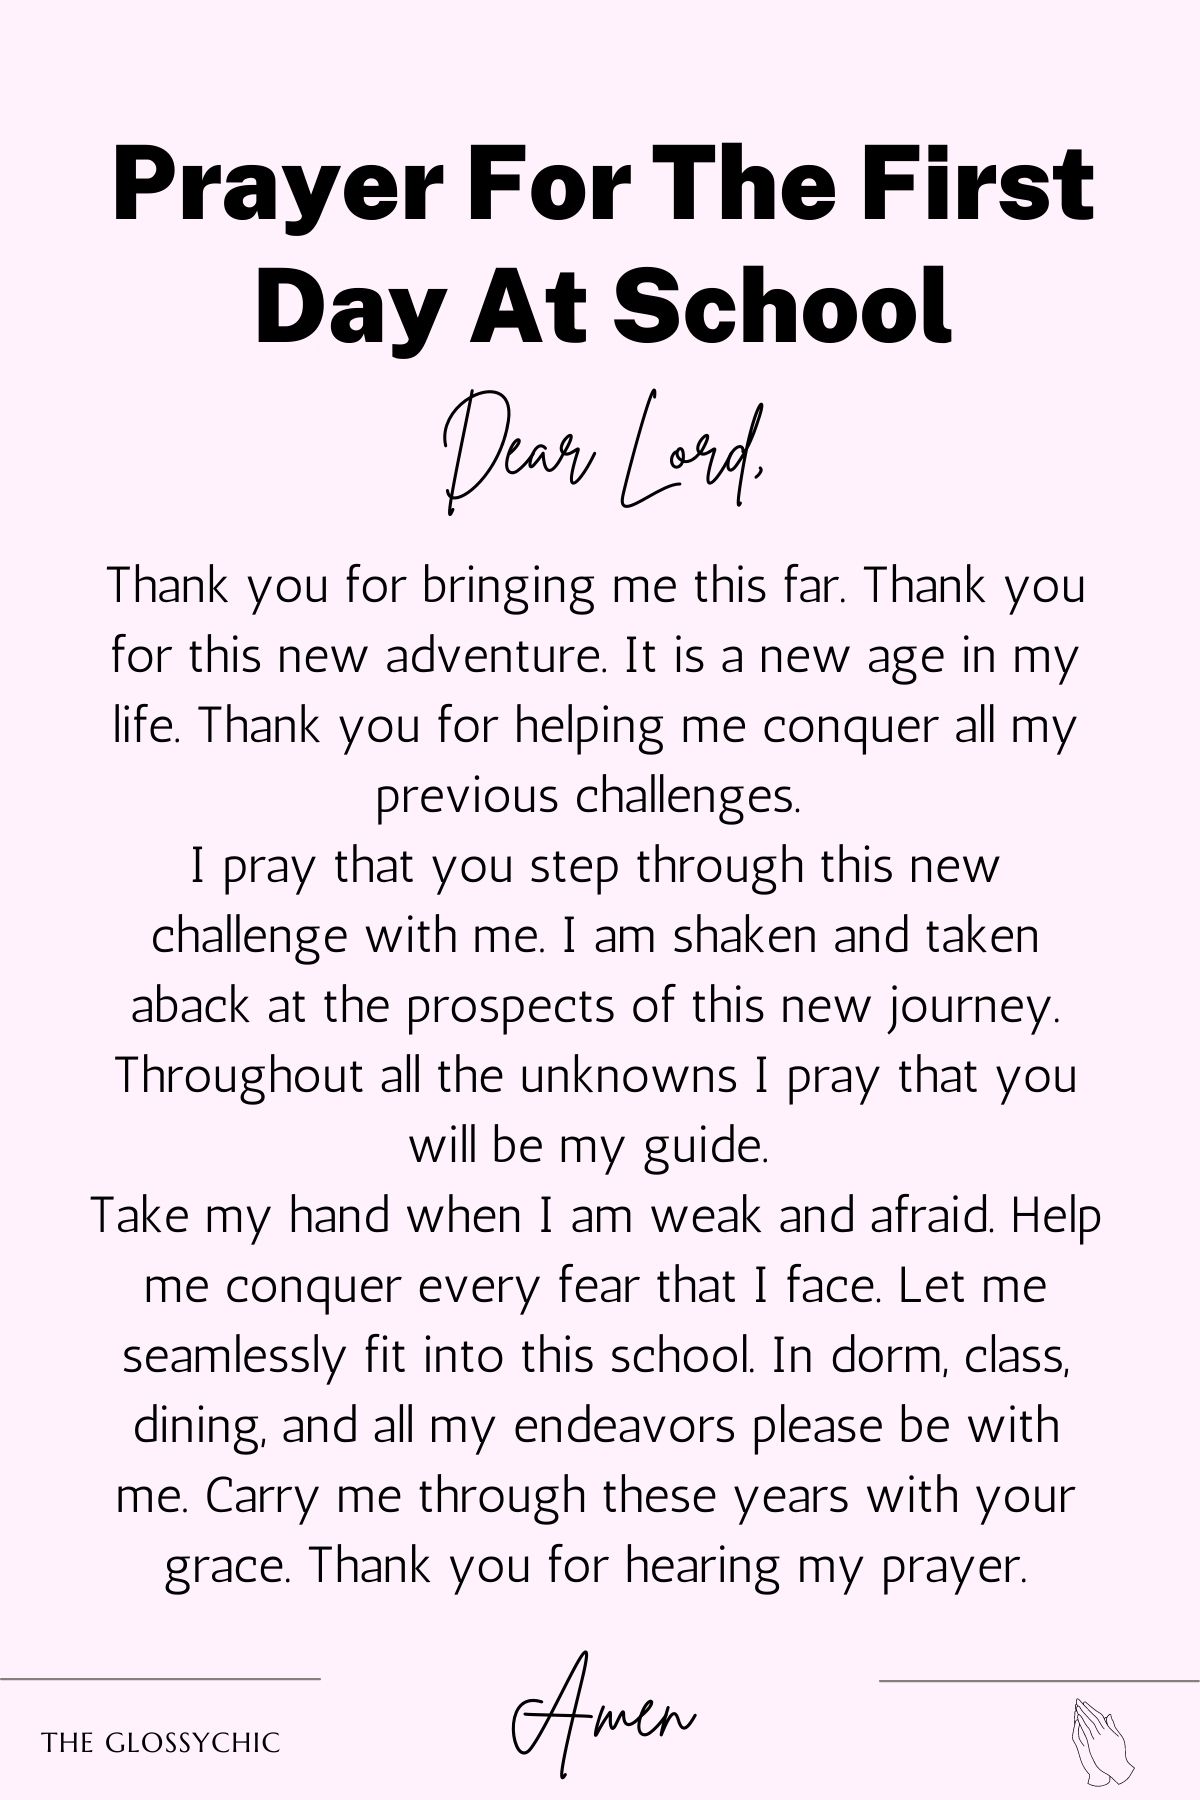 Prayer for the first day at school